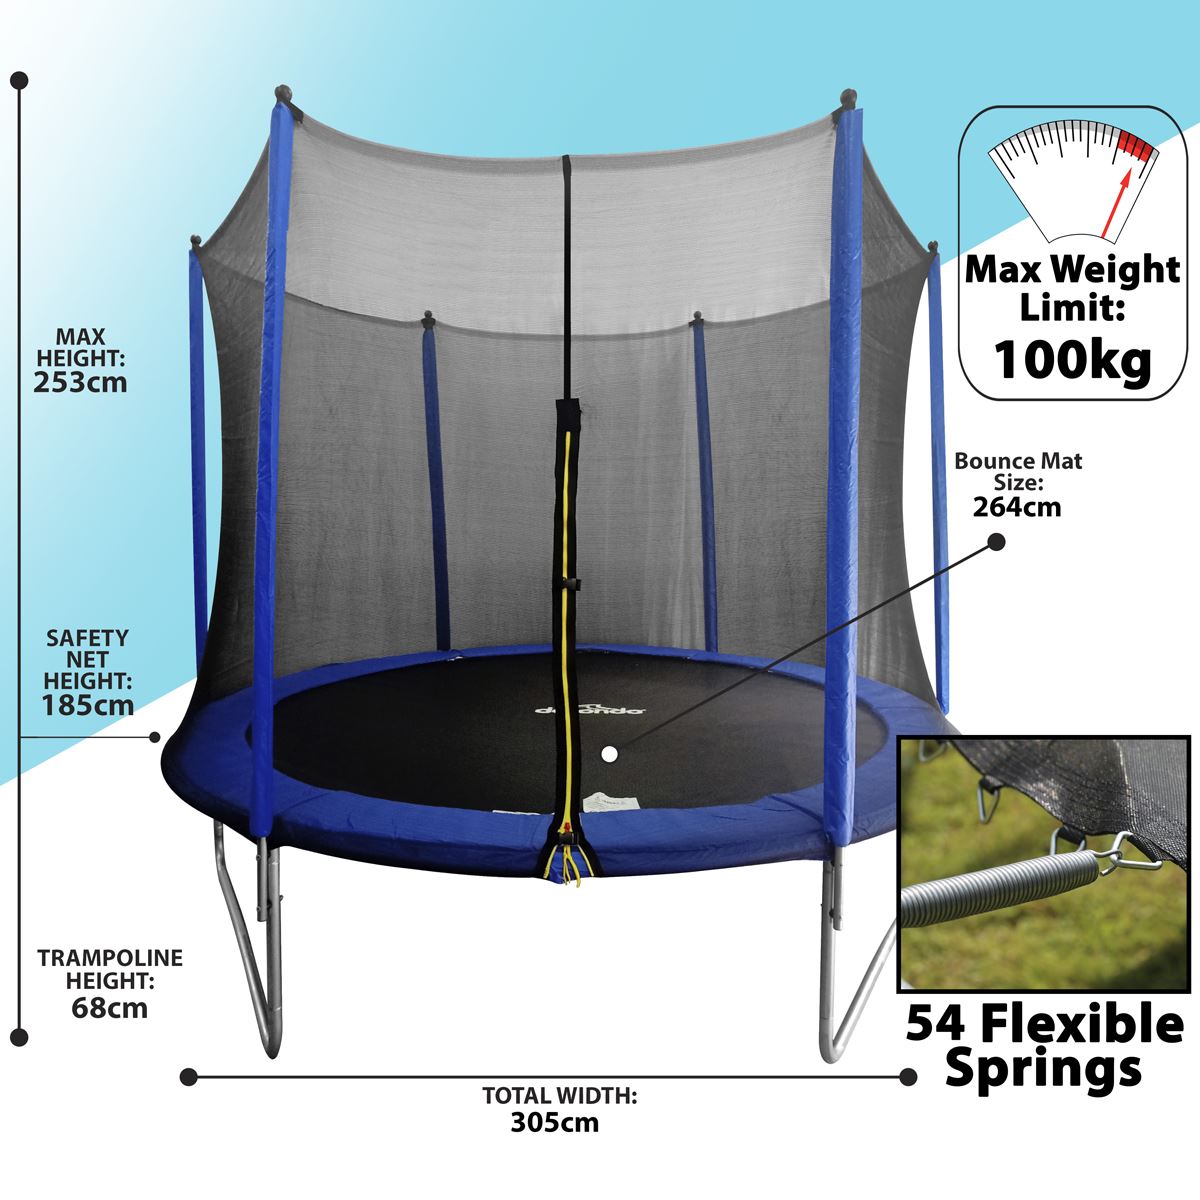 Dellonda 10ft Heavy-Duty Outdoor Trampoline with Safety Enclosure Net